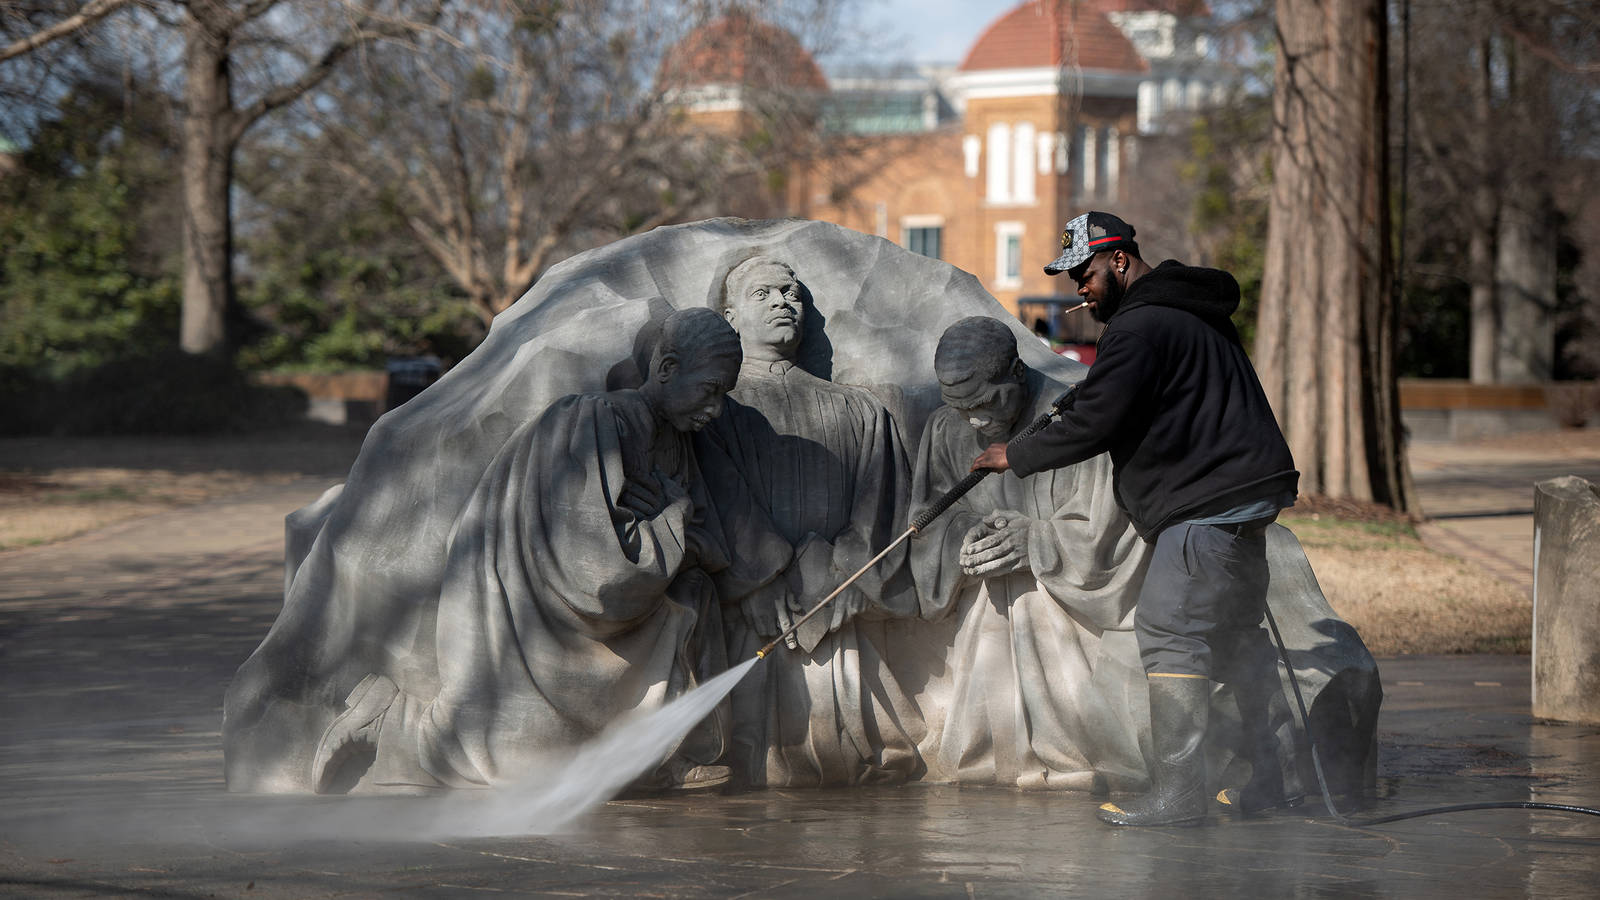 <p>A worker power-washes the Three Ministers Kneeling statue in Kelly Ingram Park in Birmingham. The scene immortalizes the moment in 1963 when clergy members, who were leading a Palm Sunday protest march, knelt to pray when faced with imminent violence.</p>